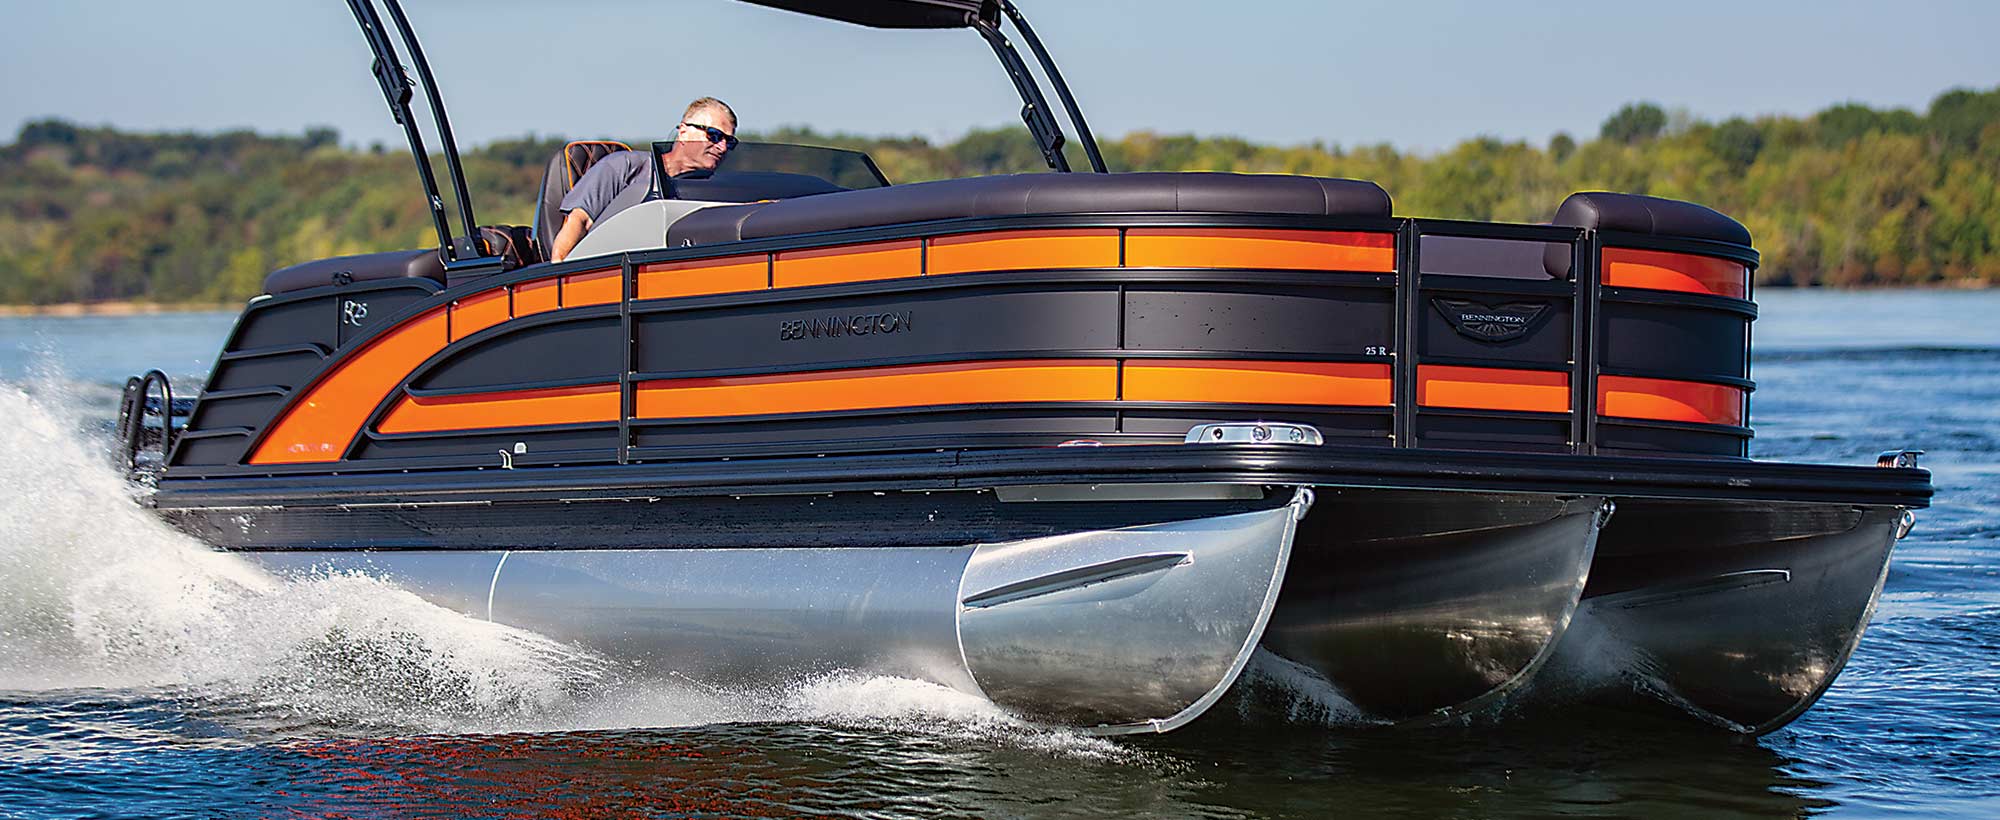 Man driving an orange and black Bennington sport pontoon with trees in the background